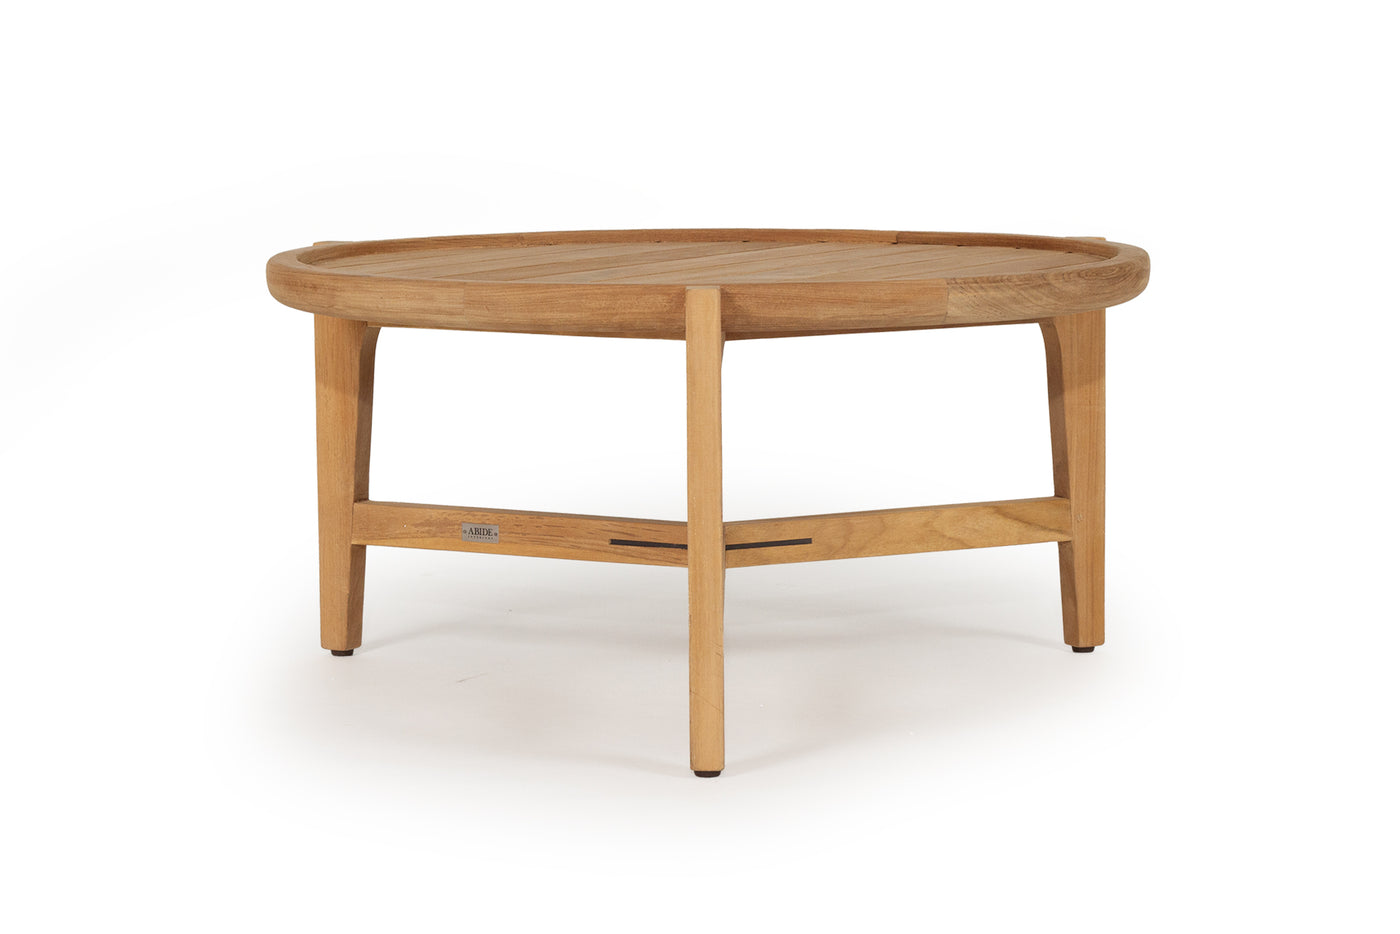 Rockcliffe Outdoor Round Coffee Table - 80cm